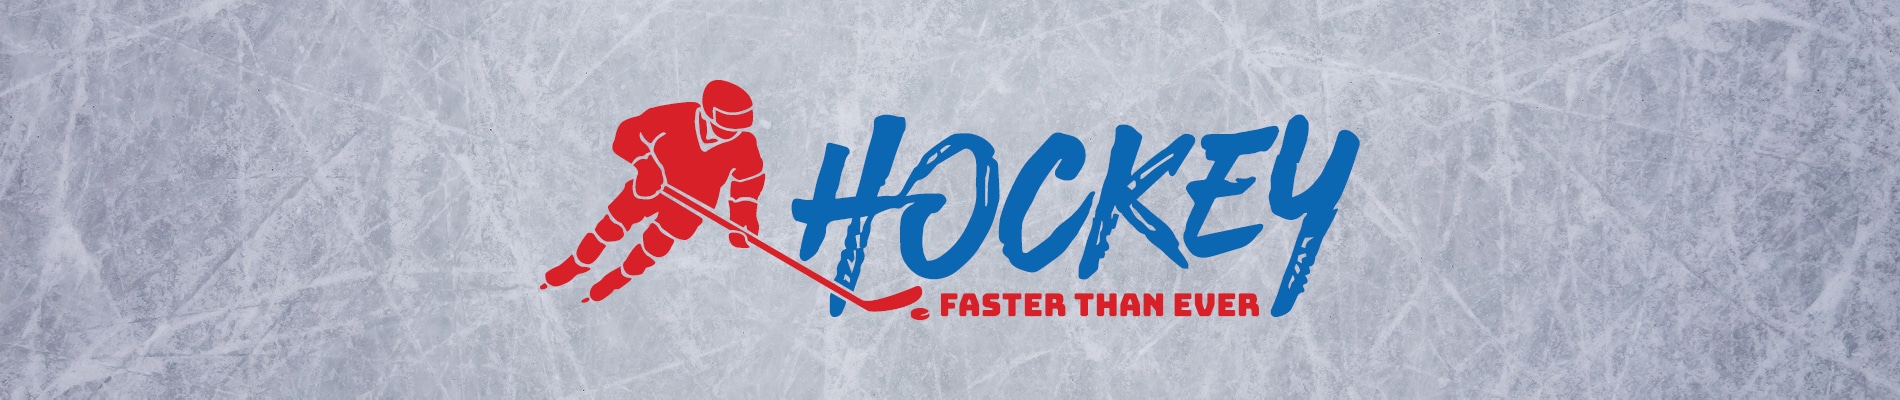 HOCKEY: Faster Than Ever